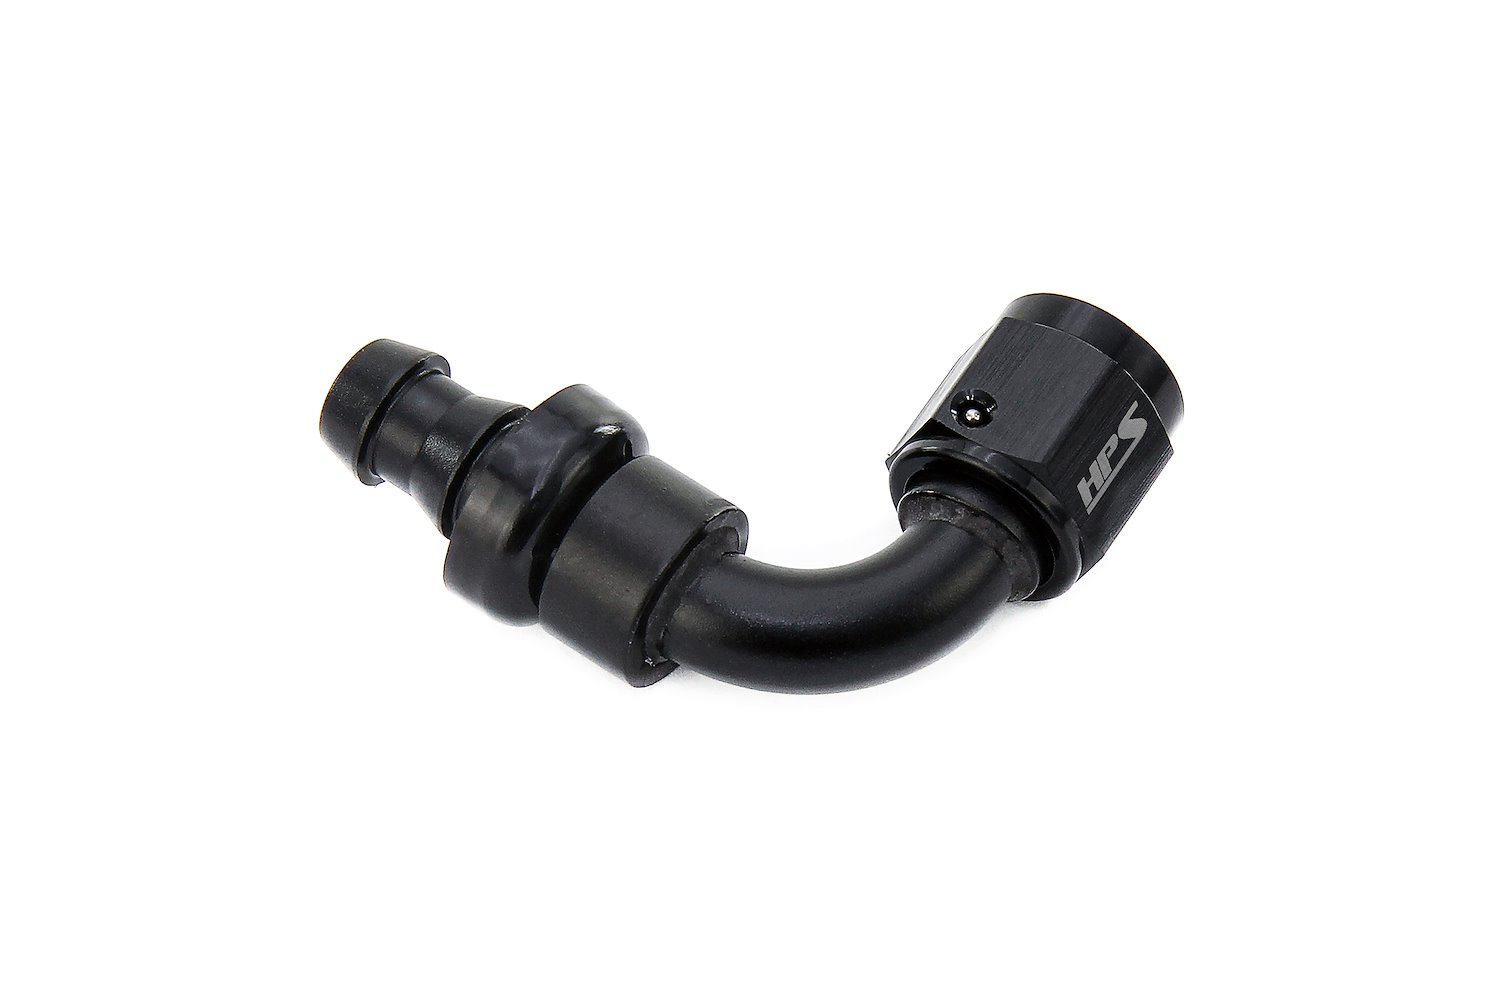 150-6004 150 Series 60-Deg Hose End, Tool-Free Assembly Hose Ends, For Push-On Style Hoses, Easy To Use